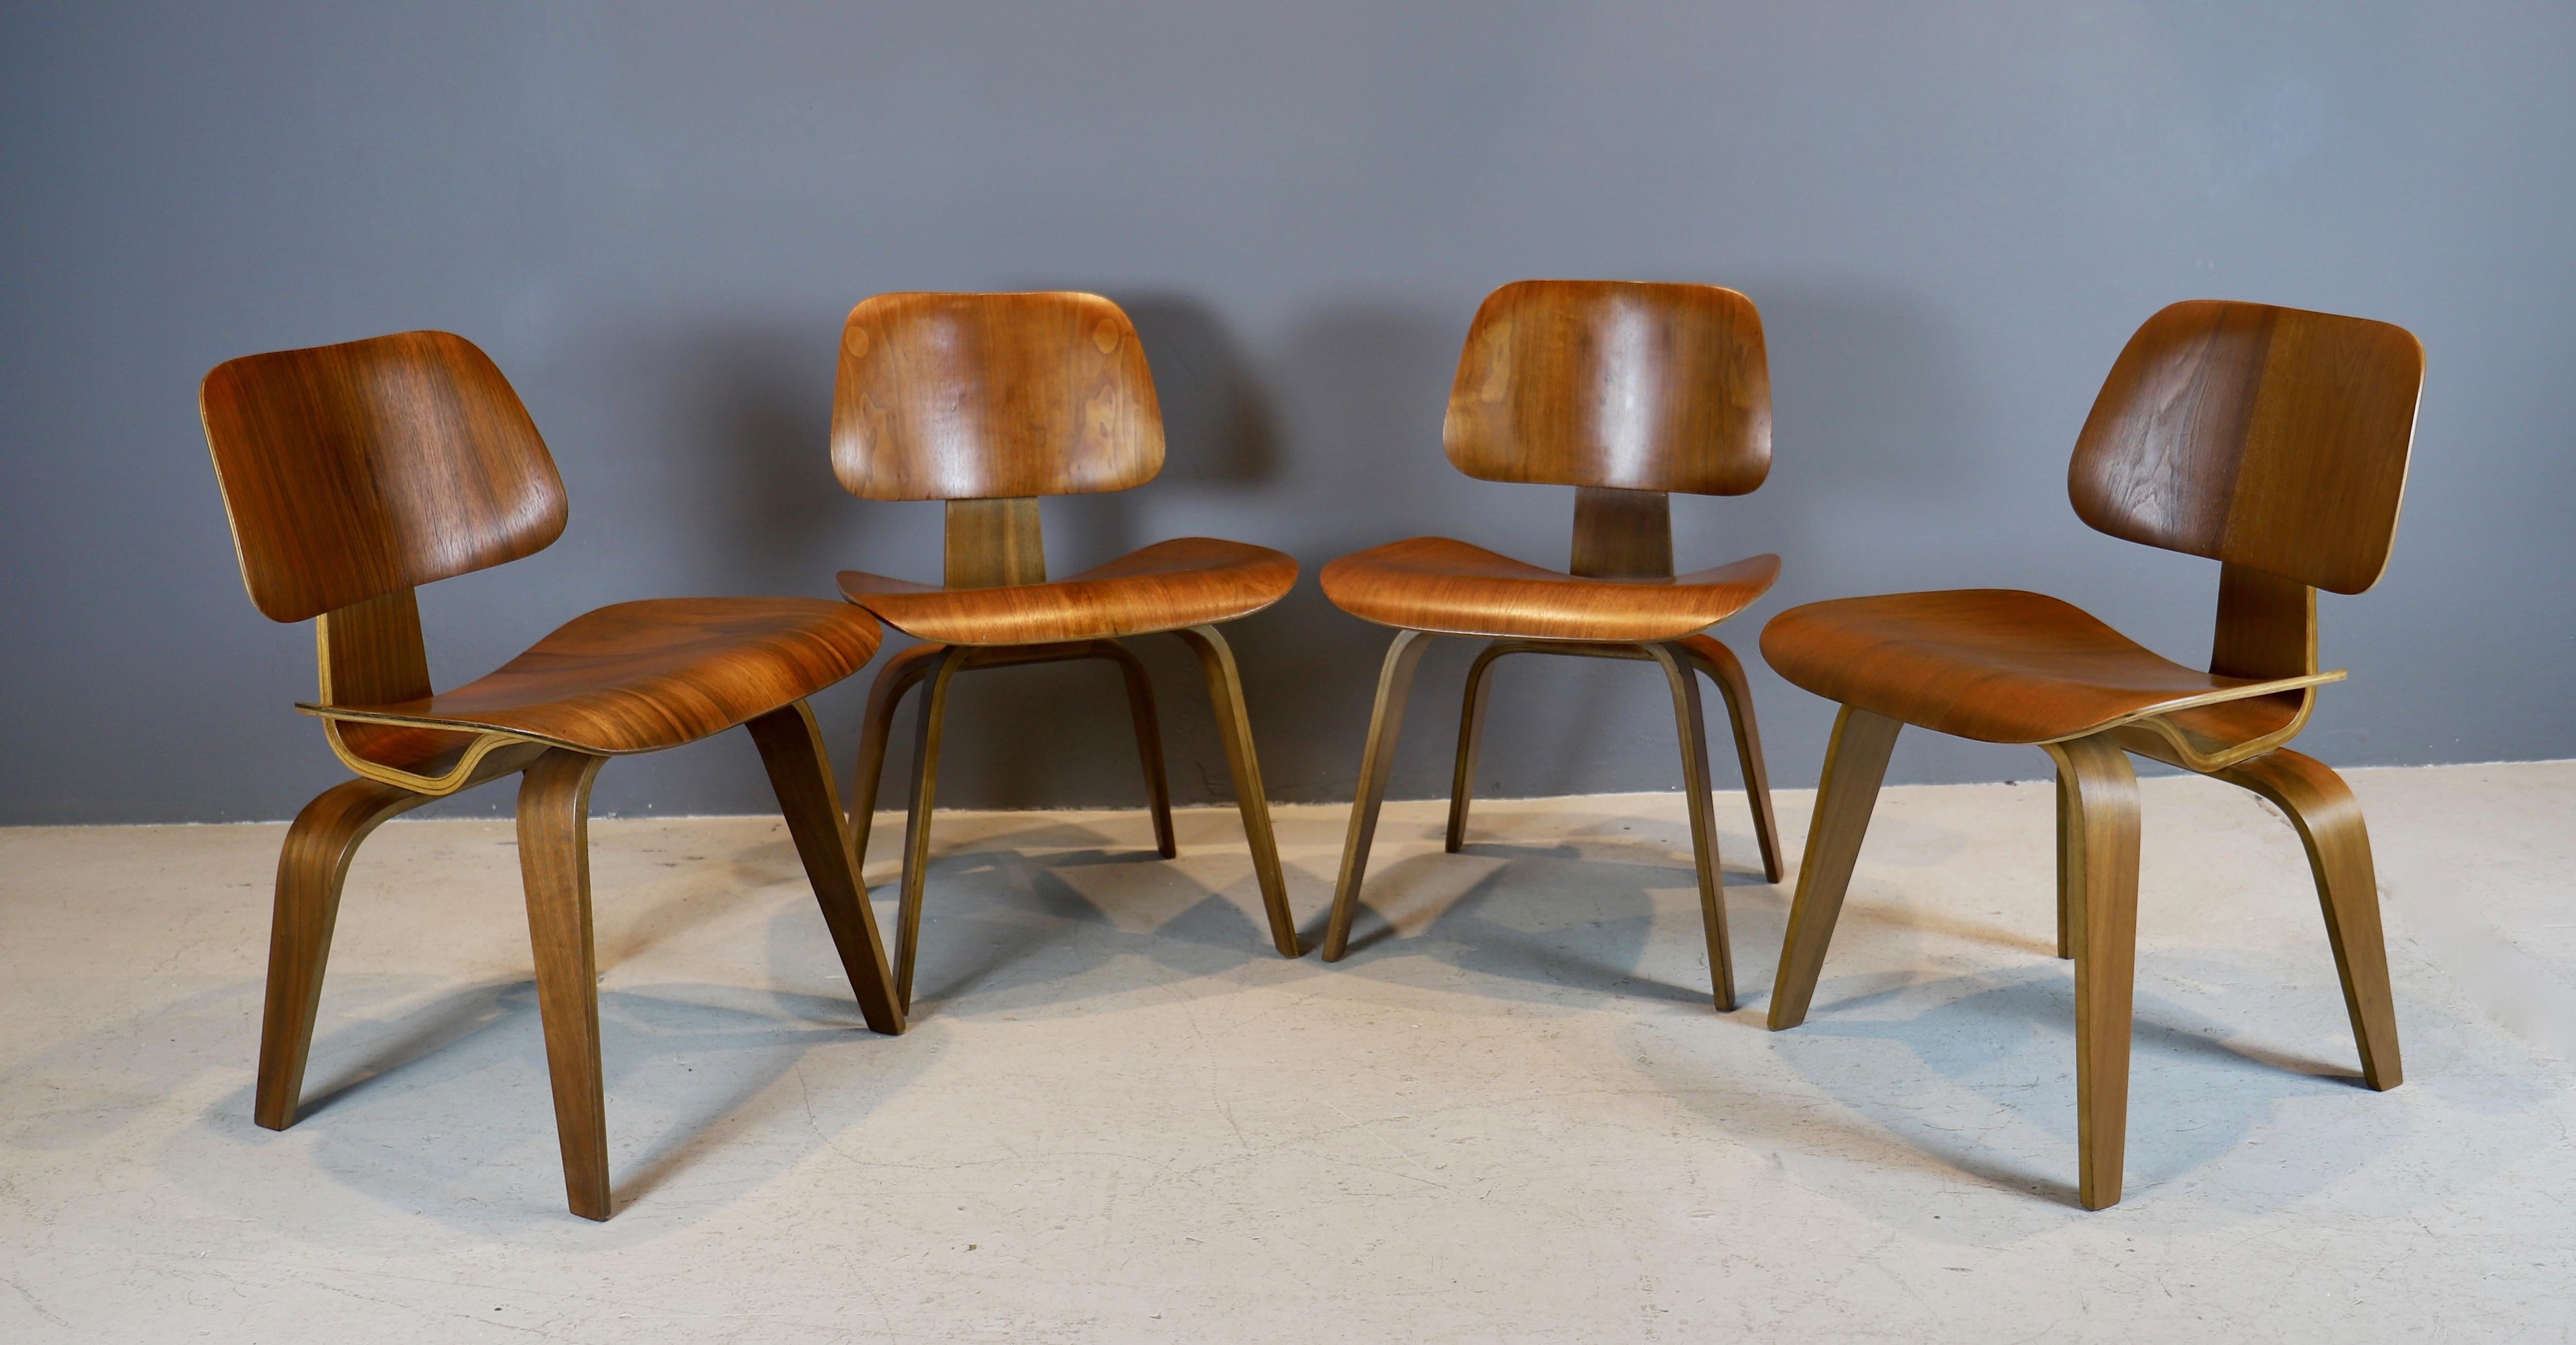 Iconic set of four “DCW” chairs by Charles and Ray Eames in walnut
plywood, circa 1940s - first generation.
Early Evans production, 5/2/5 screw configuration underneath.
Chairs have been cleaned and polished, ready for use.
Old screw repair on